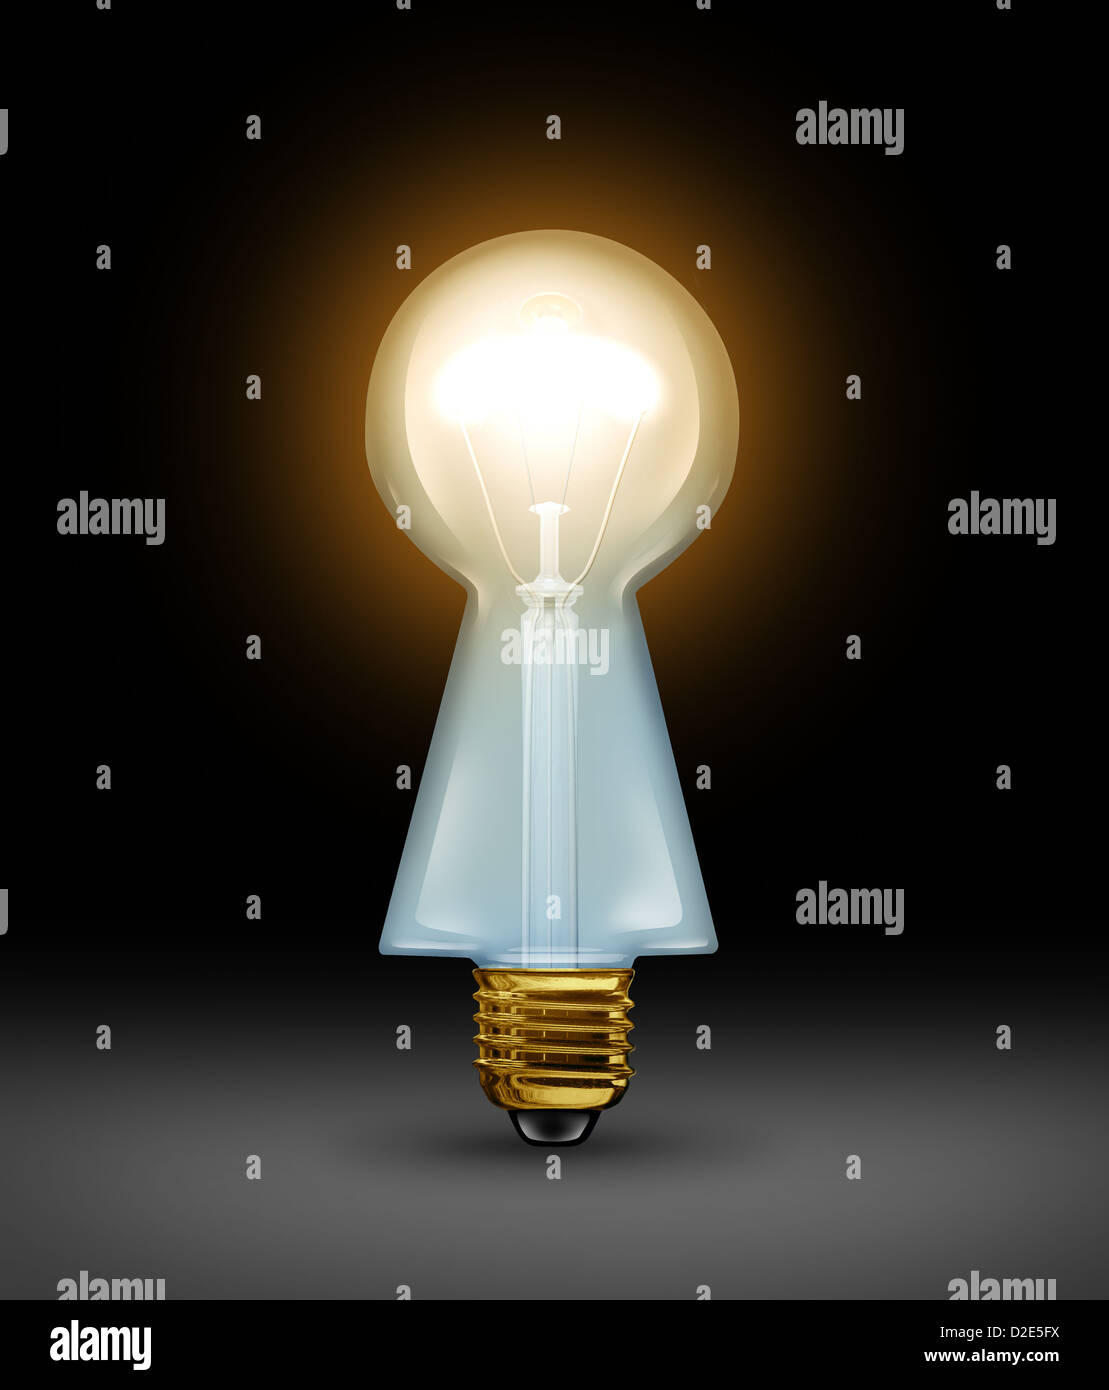 Intelligent answers and key ideas as brilliant business solutions concept with a light bulb in the shape of a keyhole on a black background as a concept of a creative key and expert guidance. Stock Photo